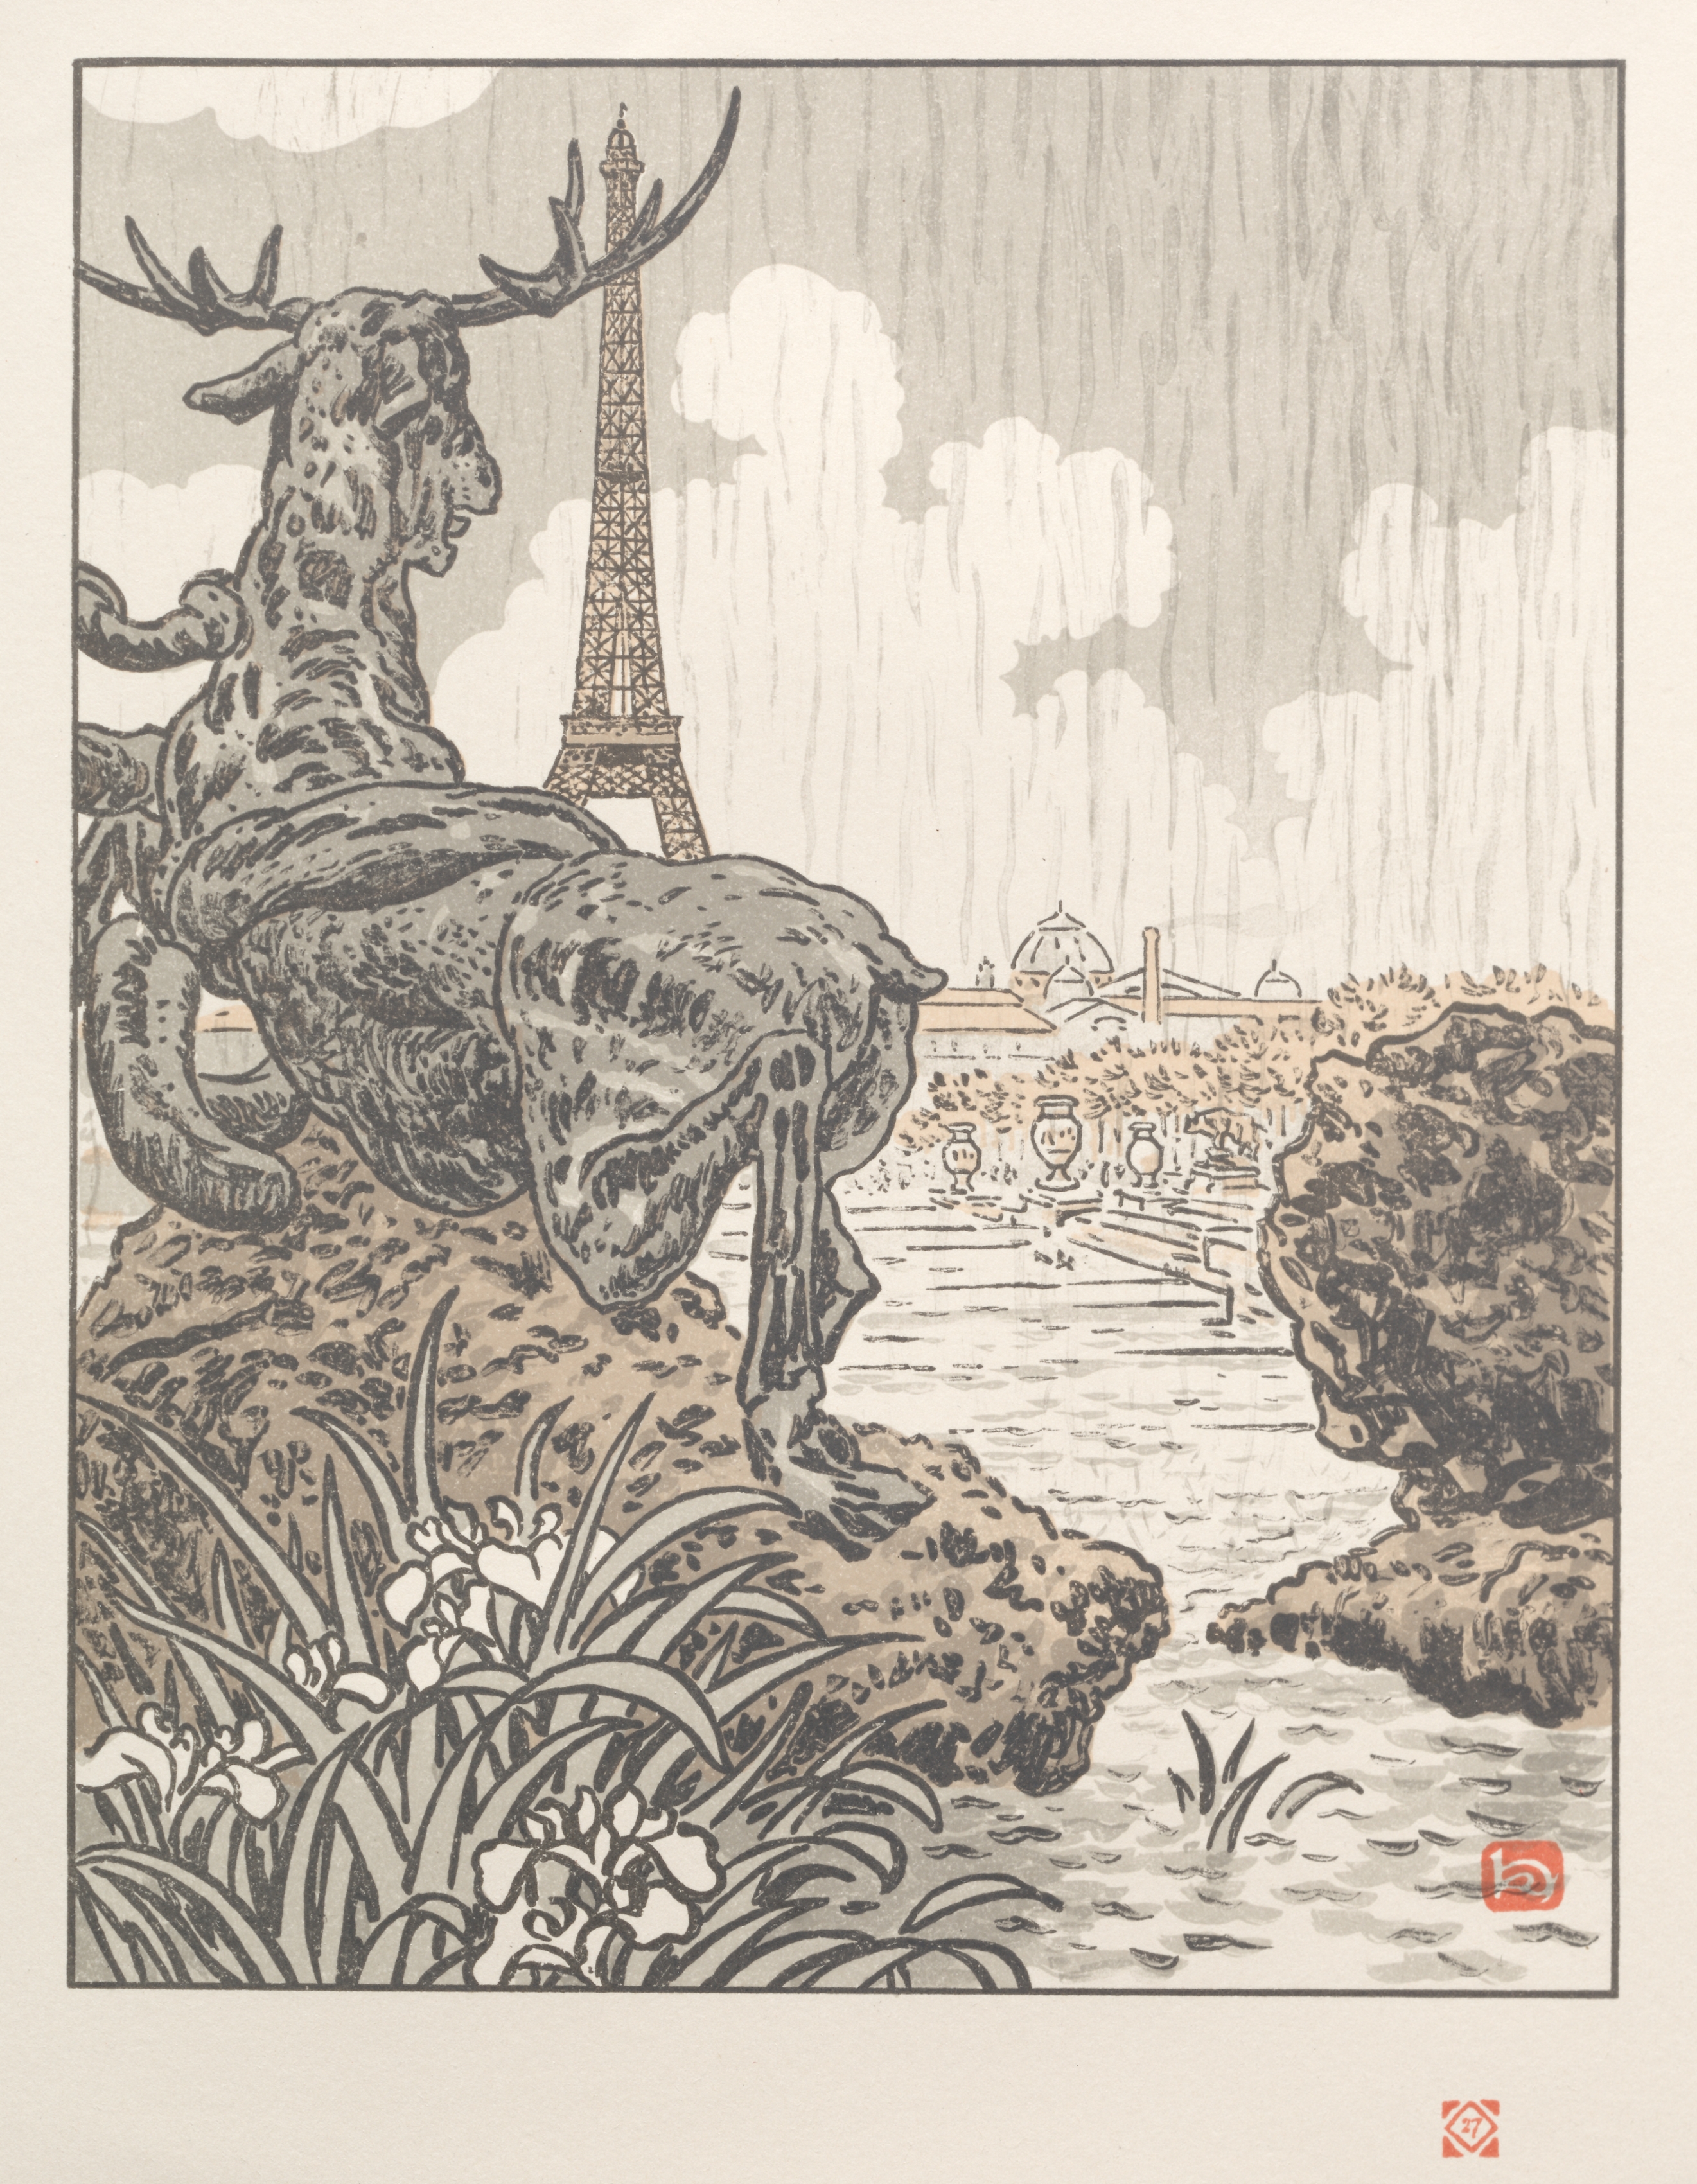 Thirty-Six Views of the Eiffel Tower: From Behind Frémiet's Elk (Trocadero)